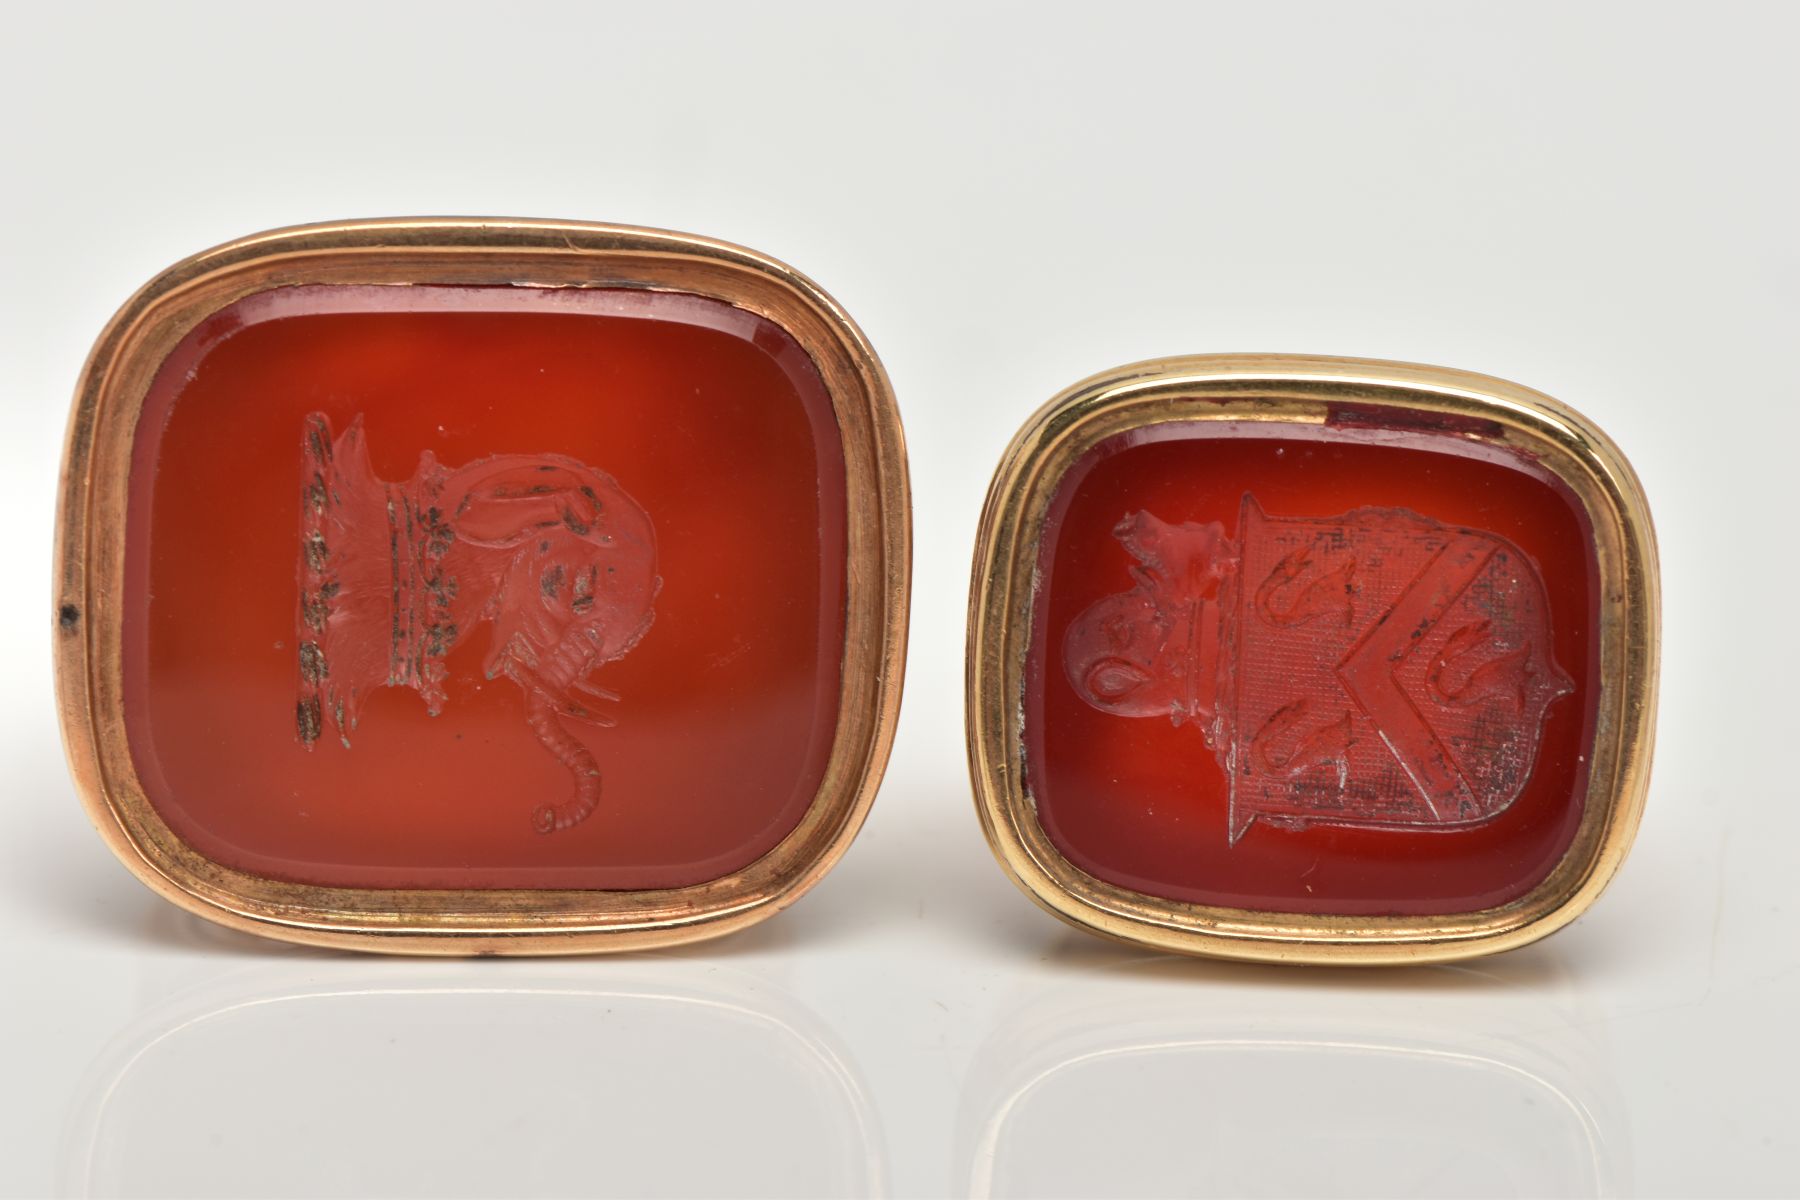 TWO CARNELIAN SEAL FOBS, the first a large rectangular carnelian intaglio detailing an elephant - Image 4 of 4